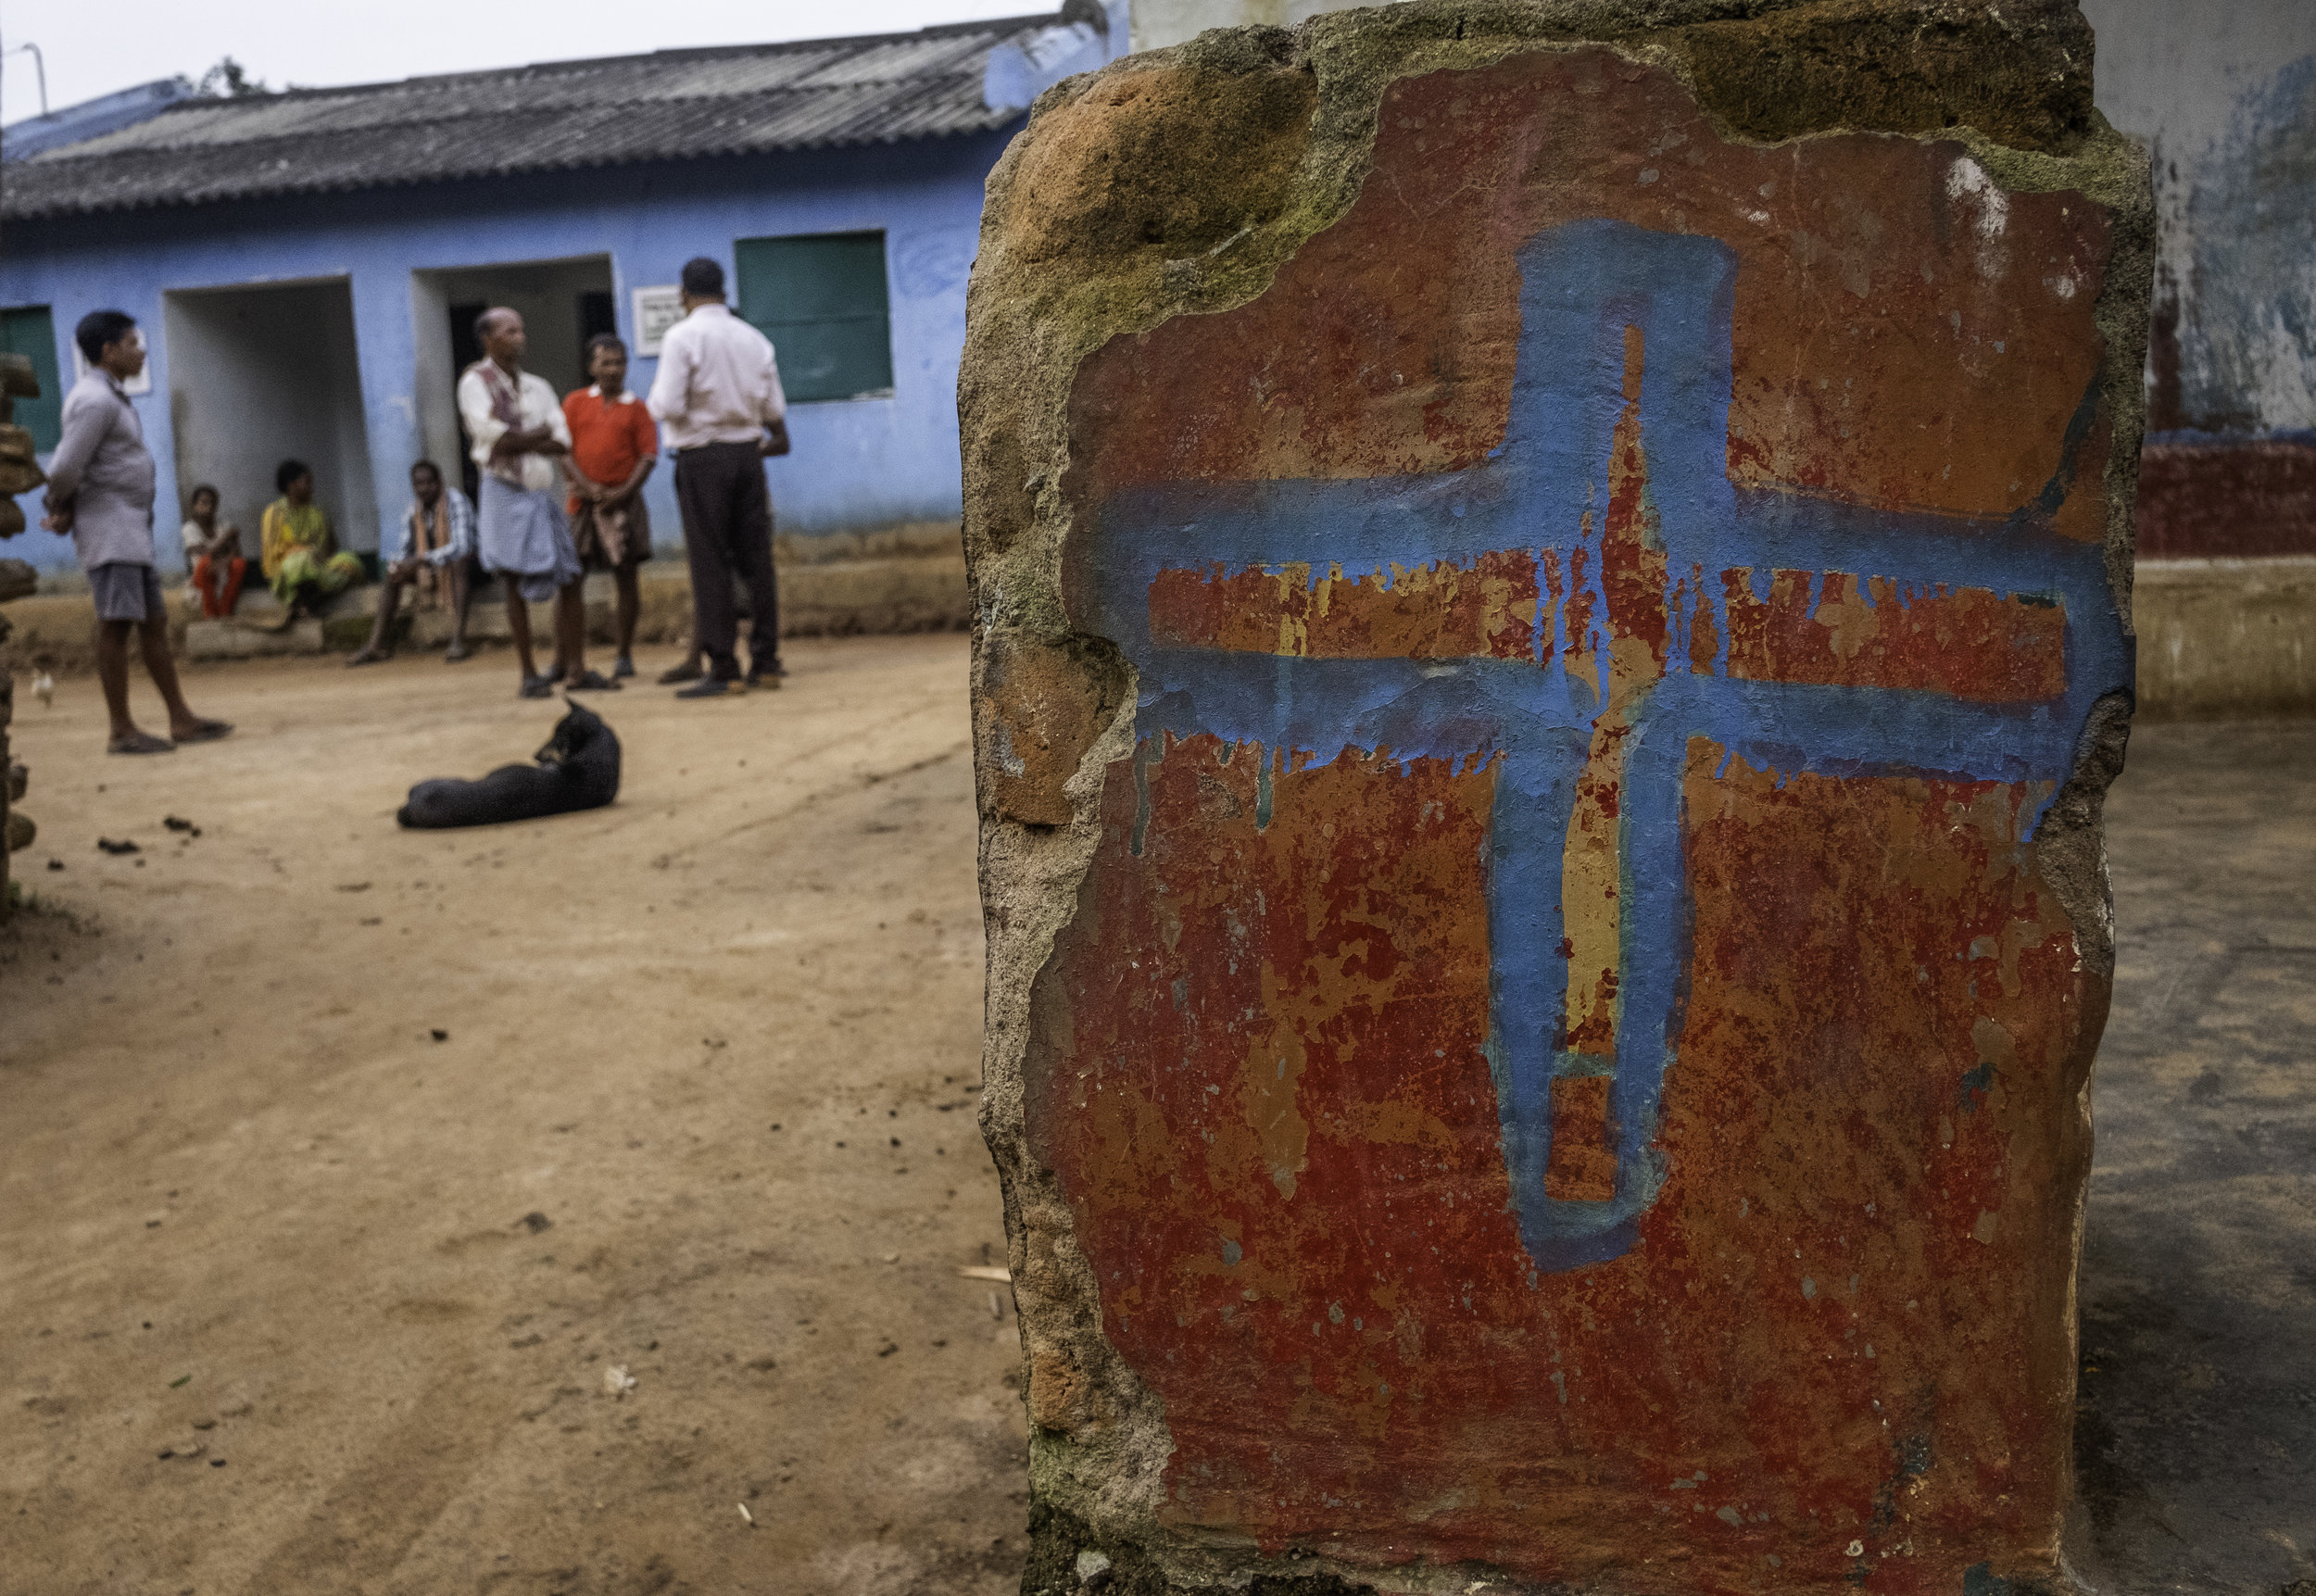   A group of Christians meet together near their rebuilt church in Kandhamal. During the Summer of 2008, almost every church in the Kandhamal area was destroyed by Hindu nationalists aligned with Prime Minister Narendra Modi’s BJP party, along with a